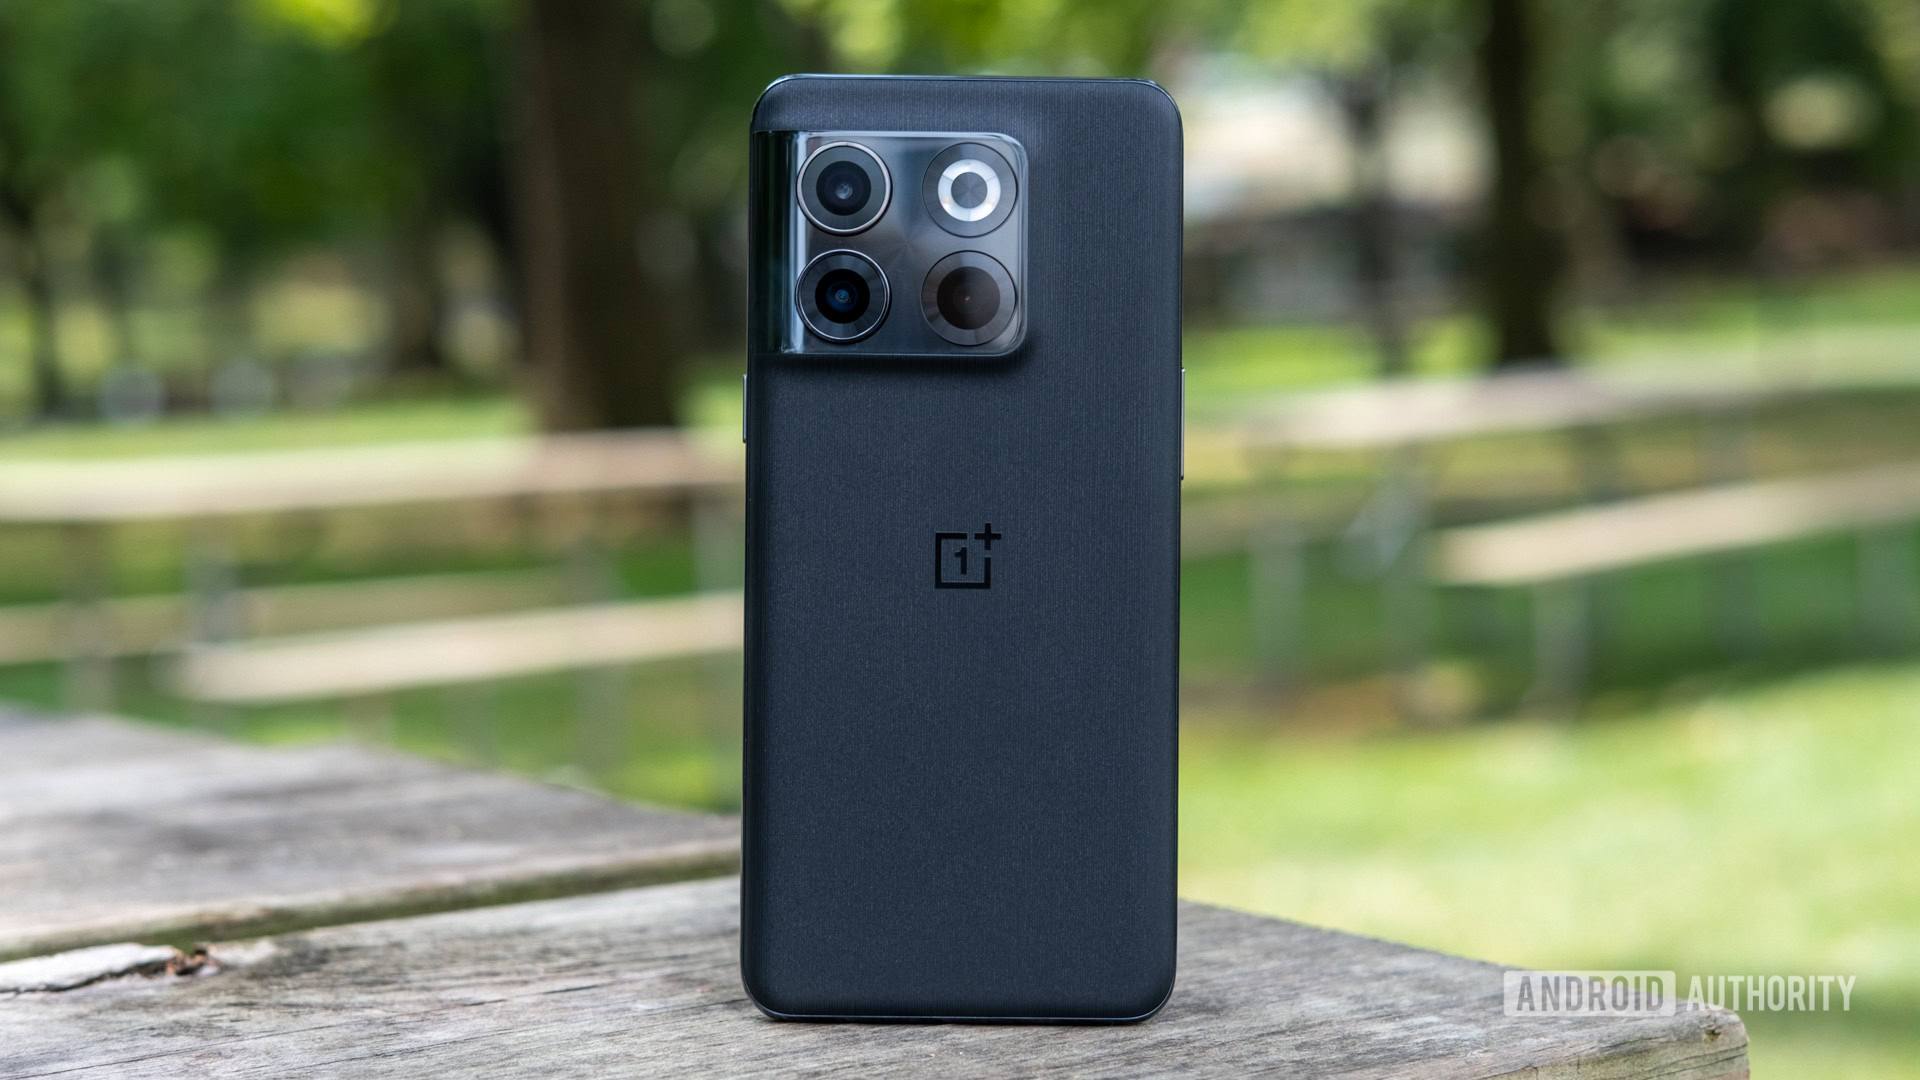 OnePlus 9 series buyer's guide: What you need to know - Android Authority